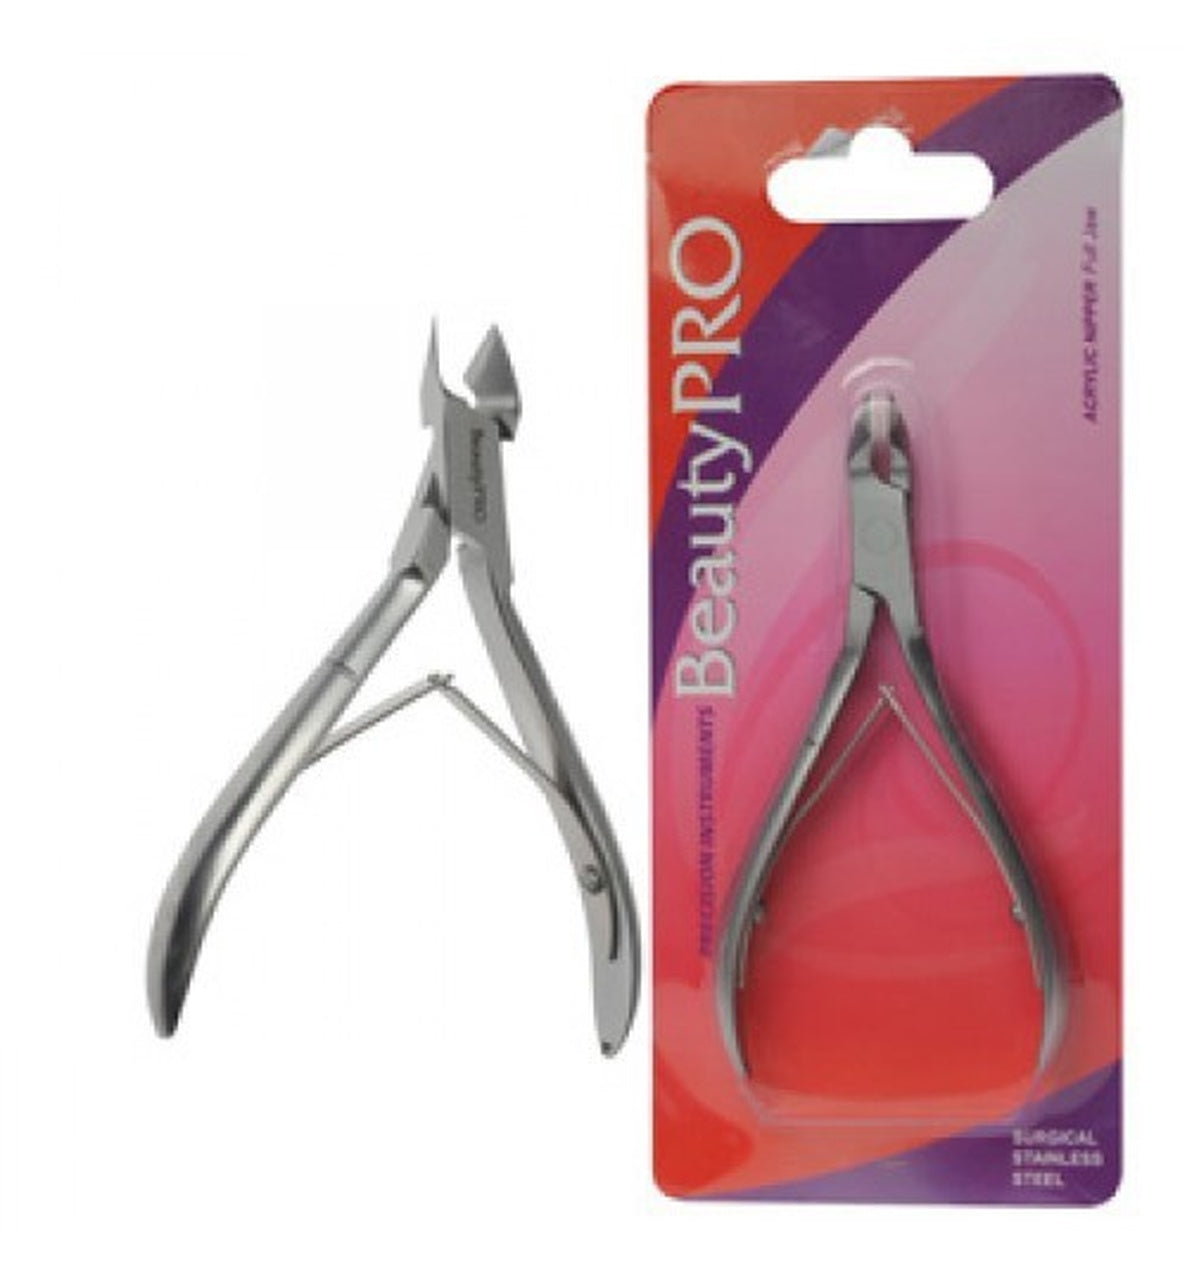 BeautyPro Precision Nail Nipper Full Jaw (Surgical Stainless Steel)